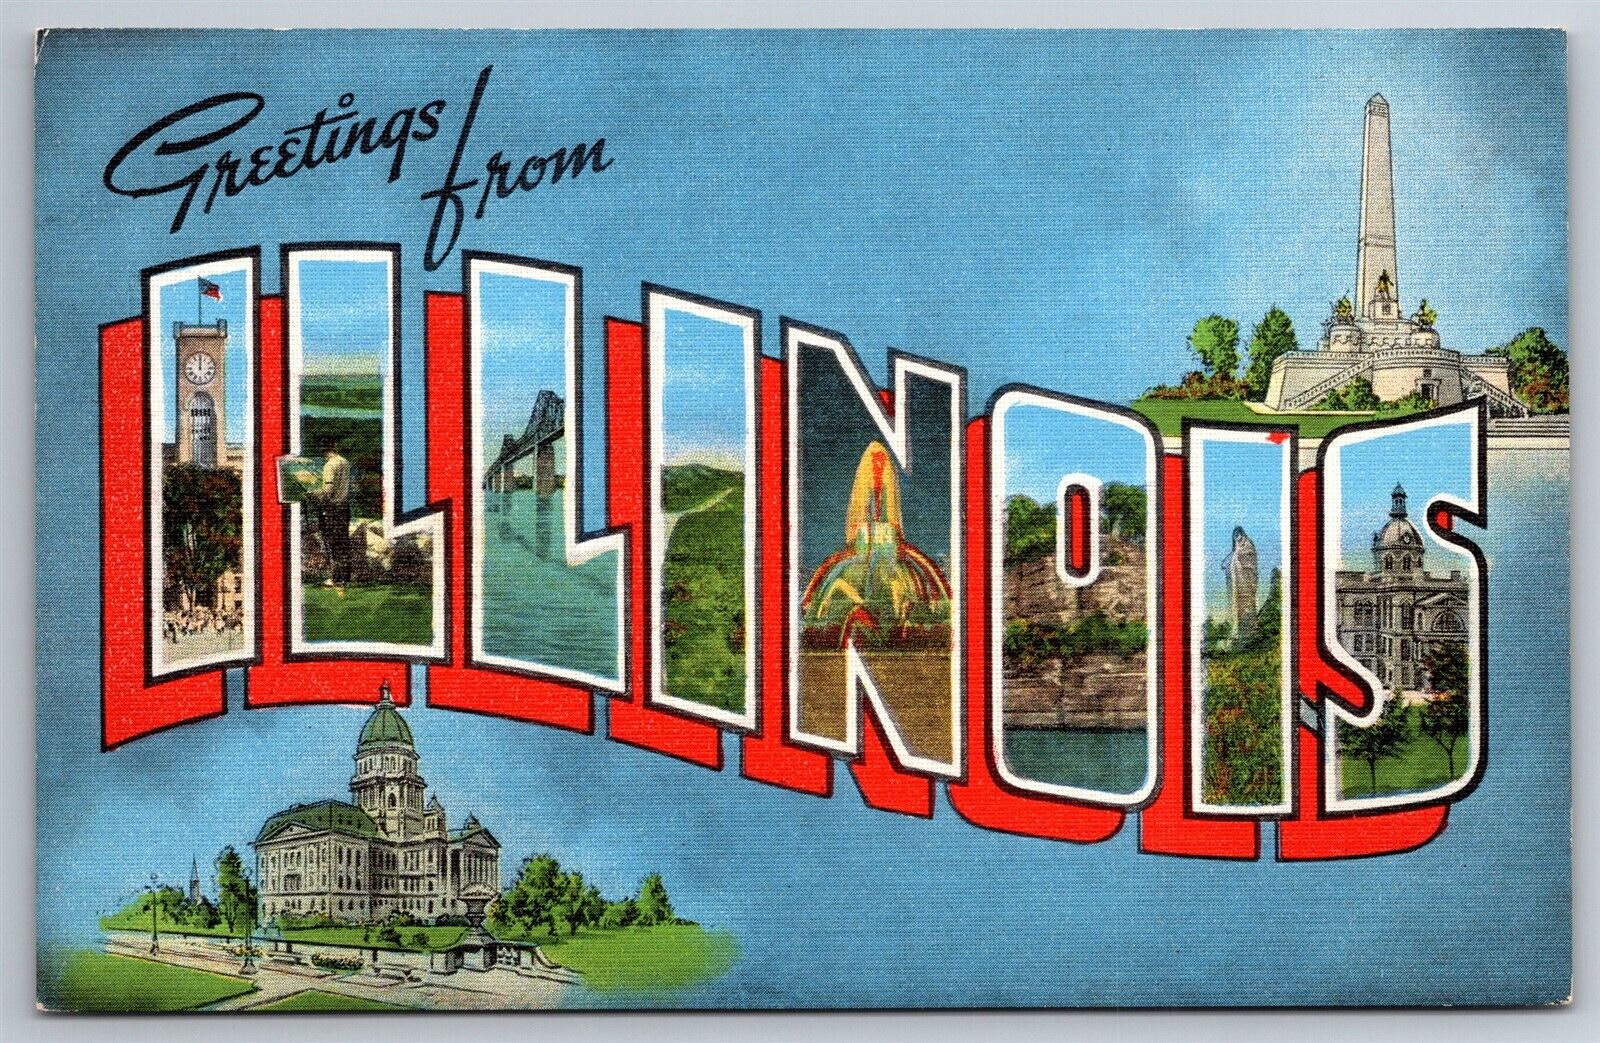 Large Letter Greetings From Illinois IL Linen Postcard T4